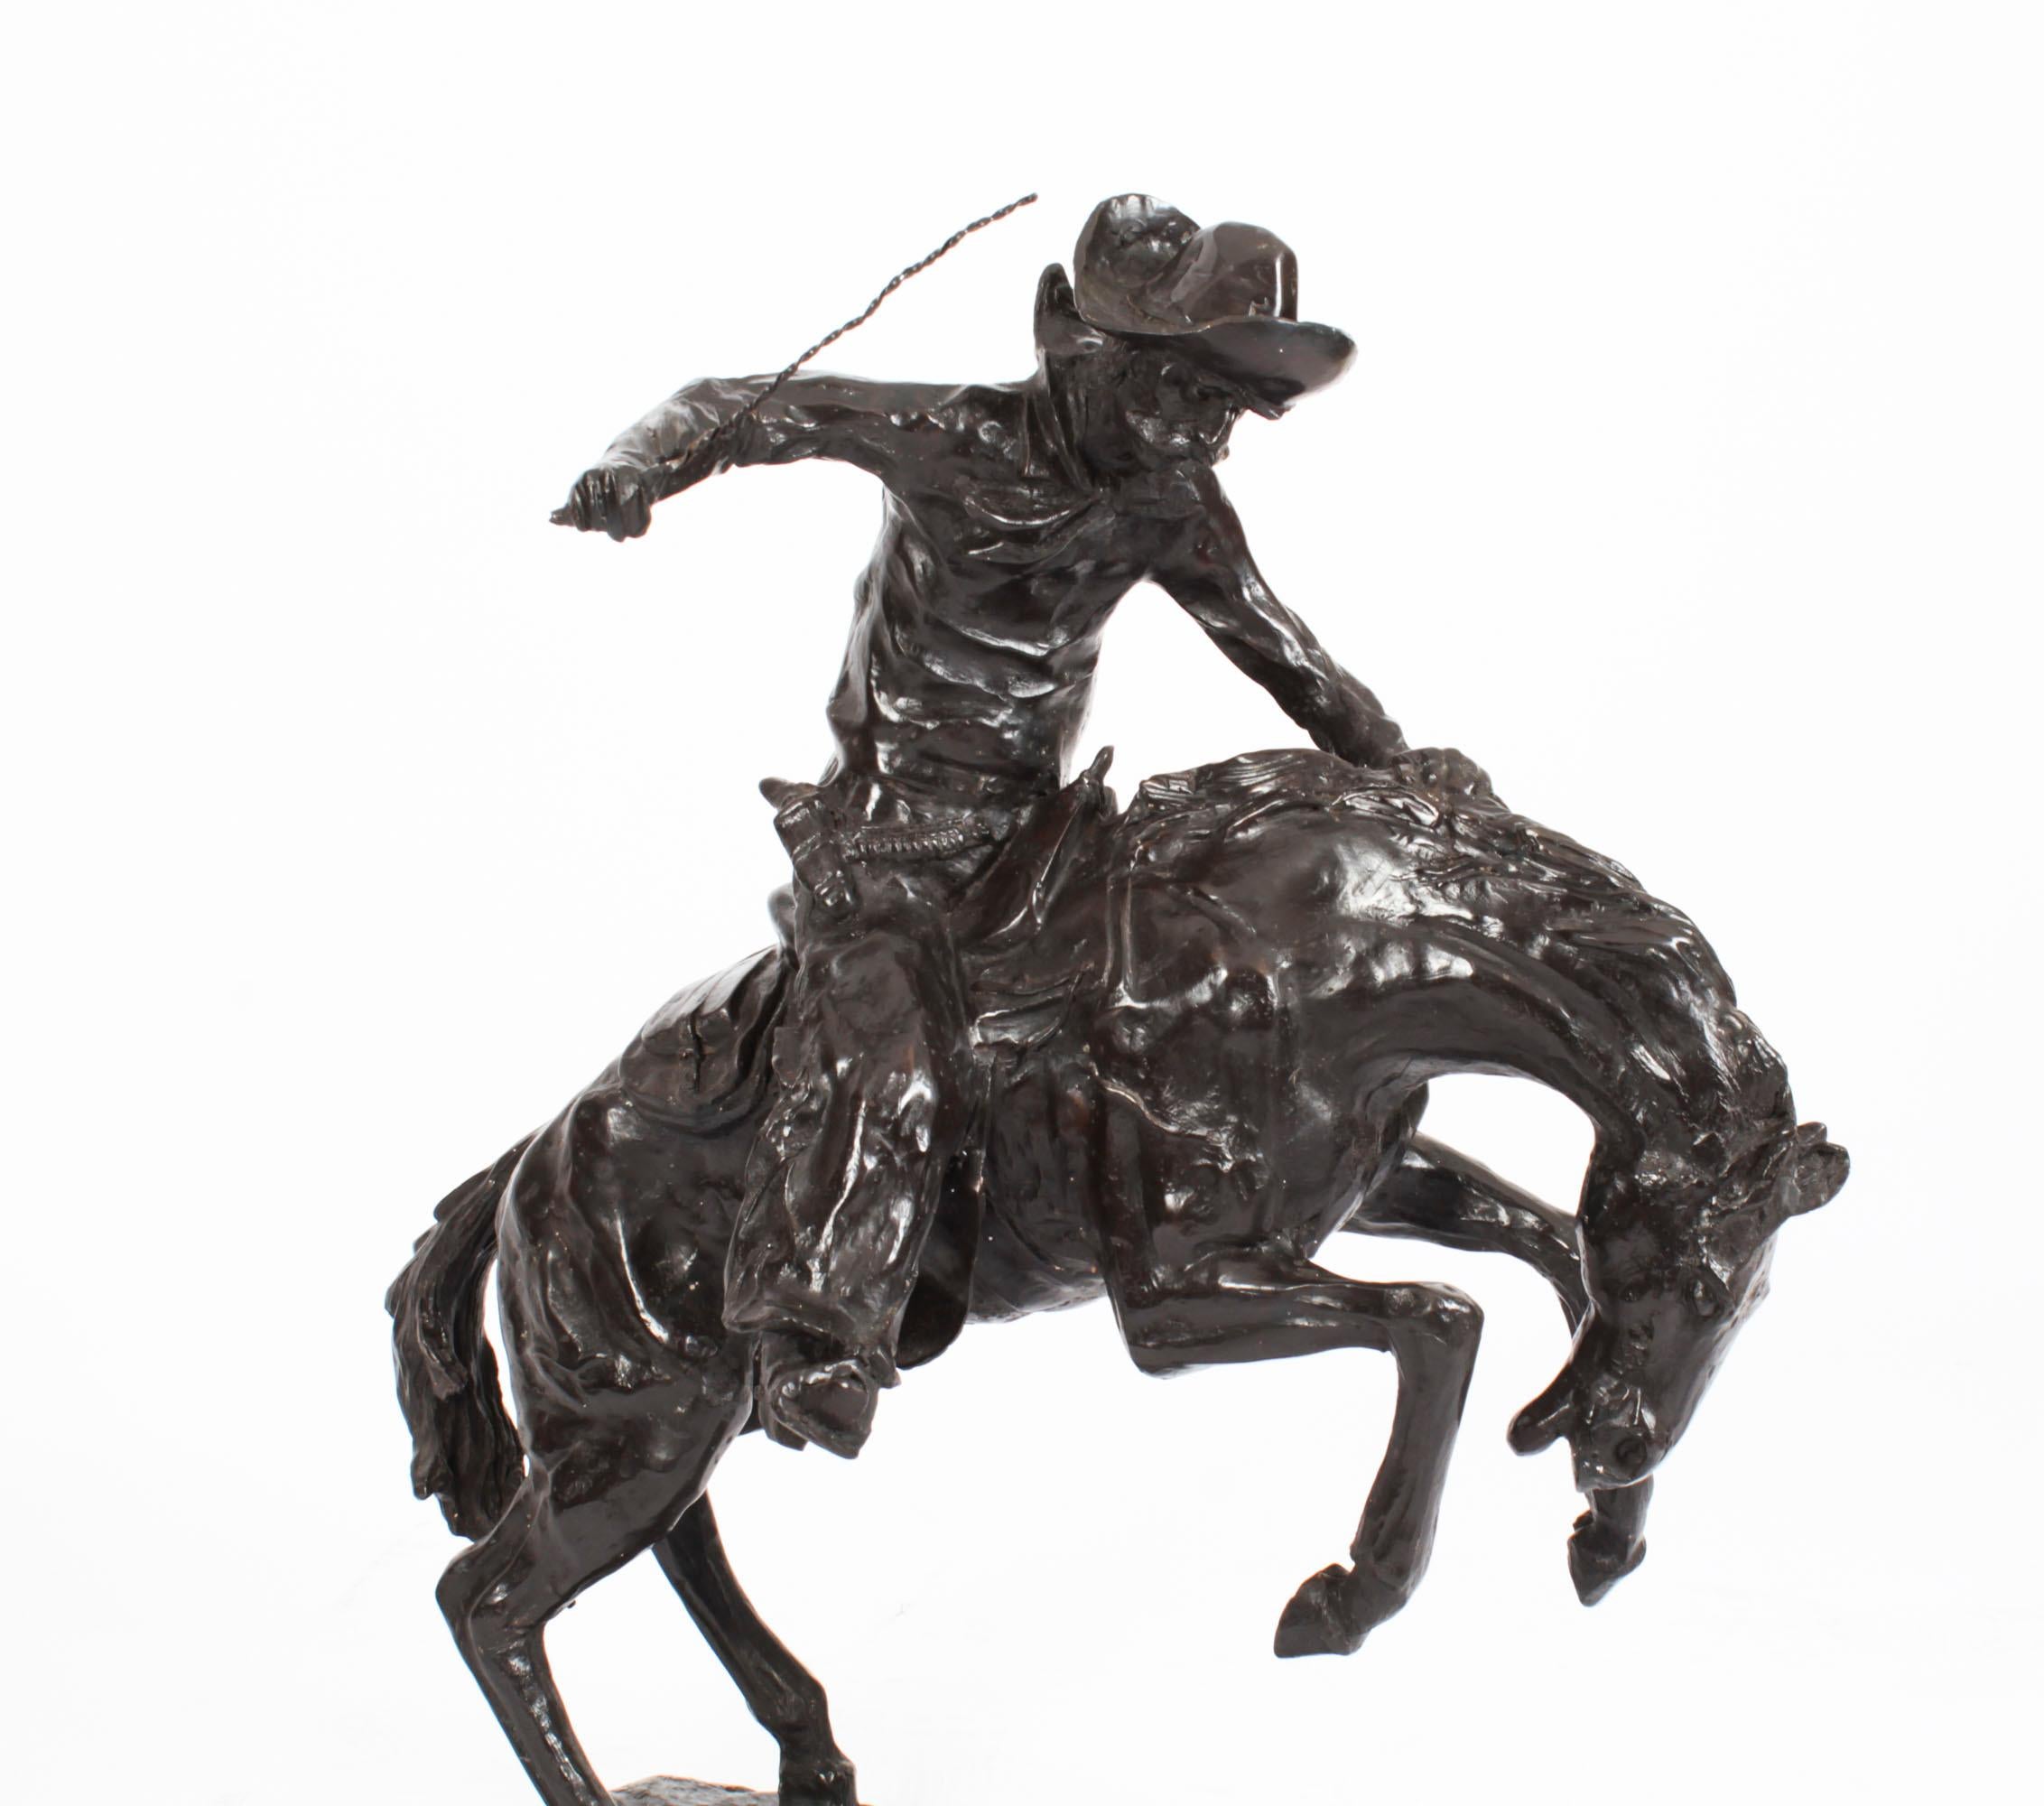 This is a very impressive bronze, after Remington, of a cowboy on horseback dating from the last quarter of the 20th century.

It was made using the 'lost wax' process, otherwise known as 'cire perdue', and is in the style of Frederic Remington's